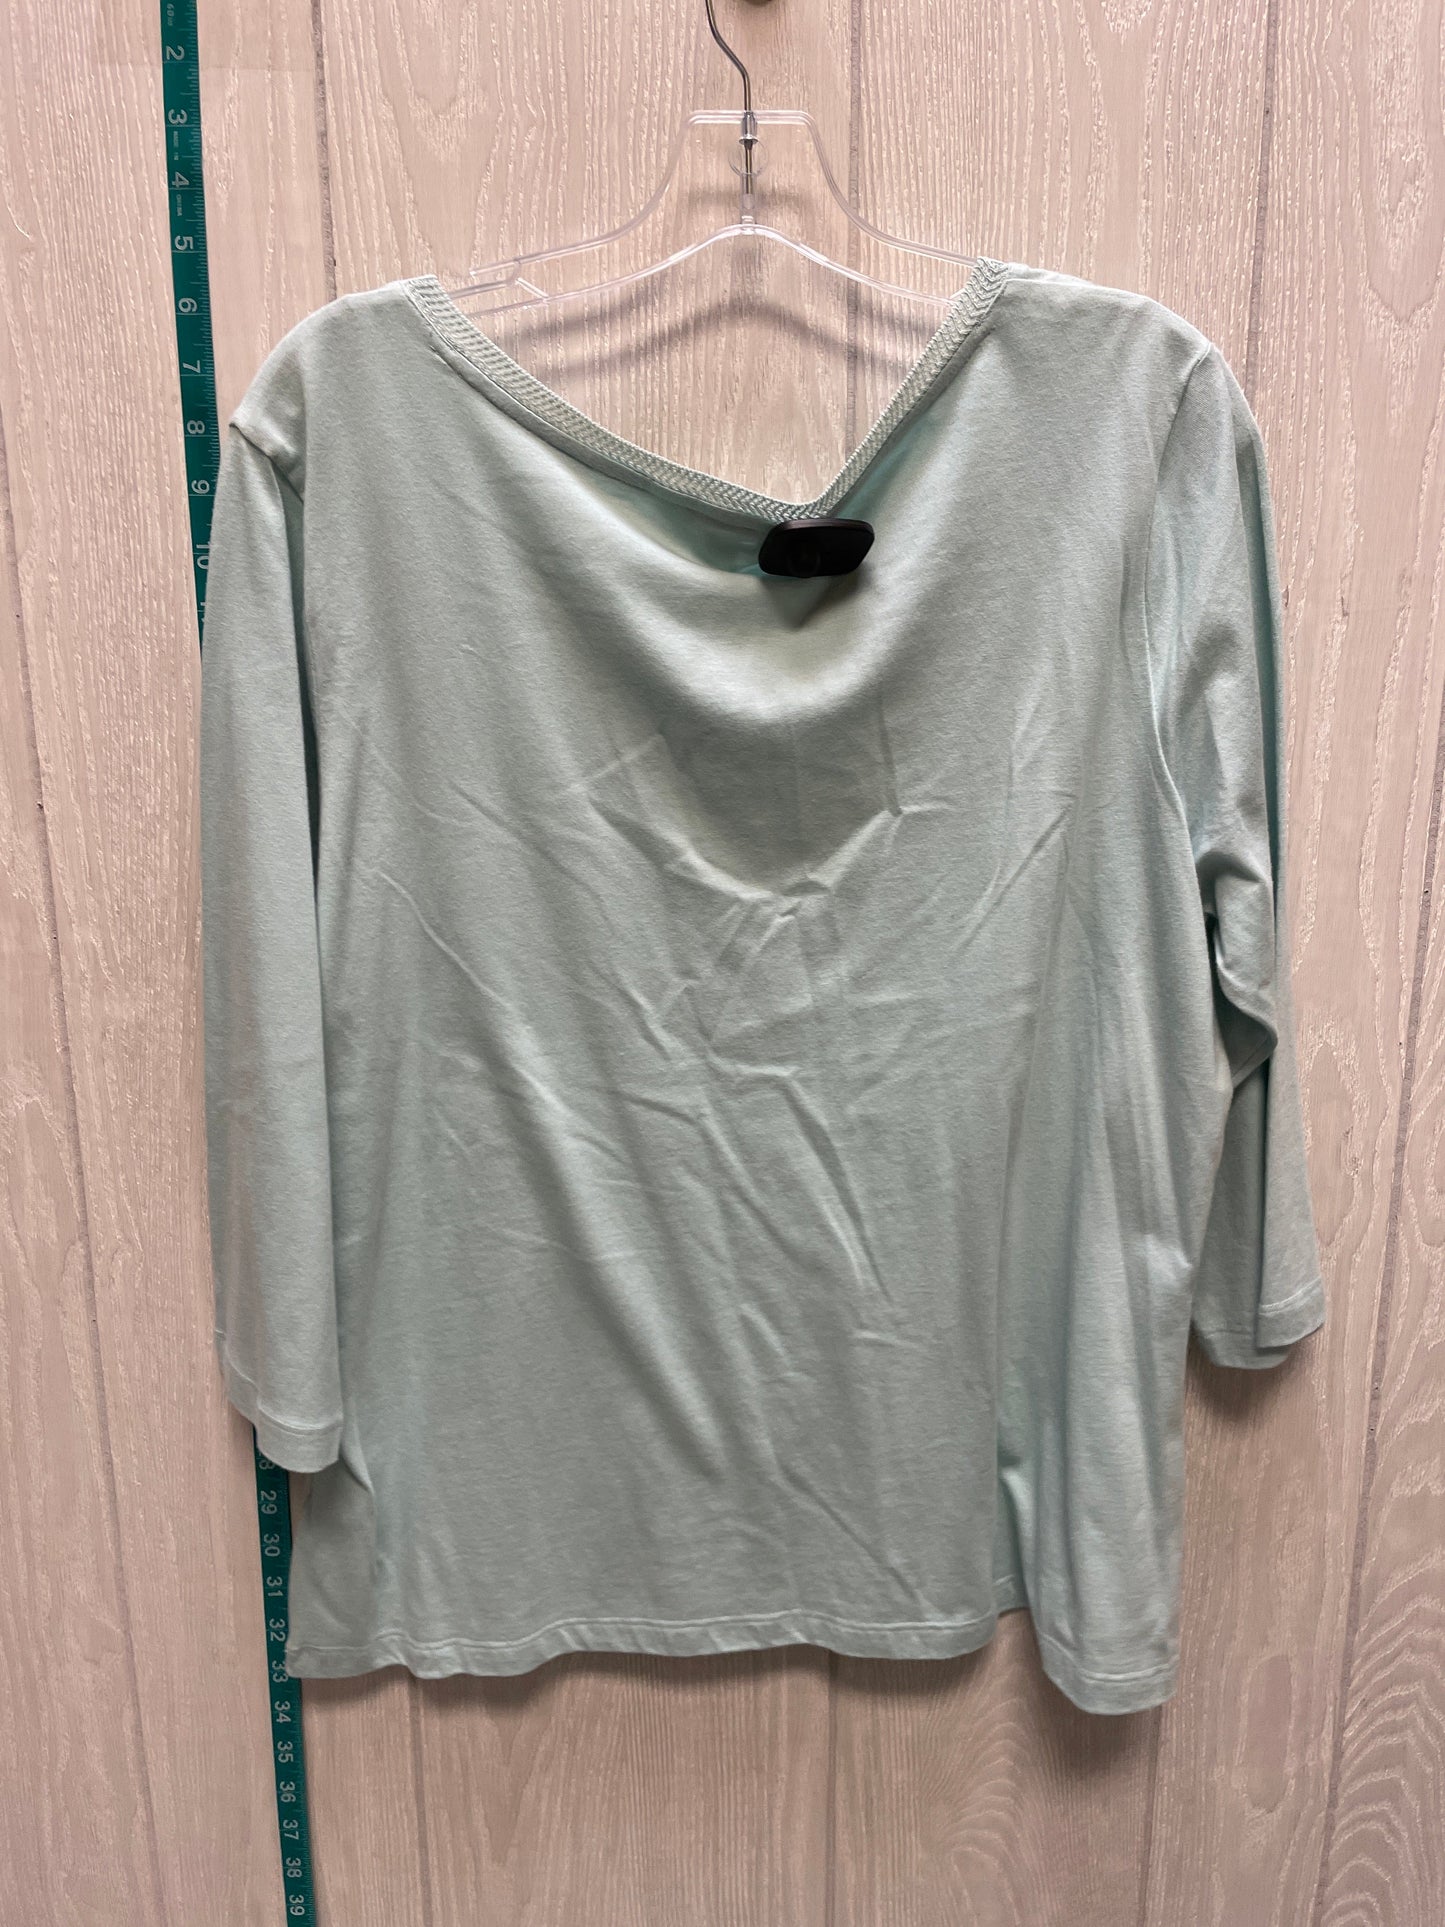 Green Top 3/4 Sleeve Christopher And Banks, Size Xl